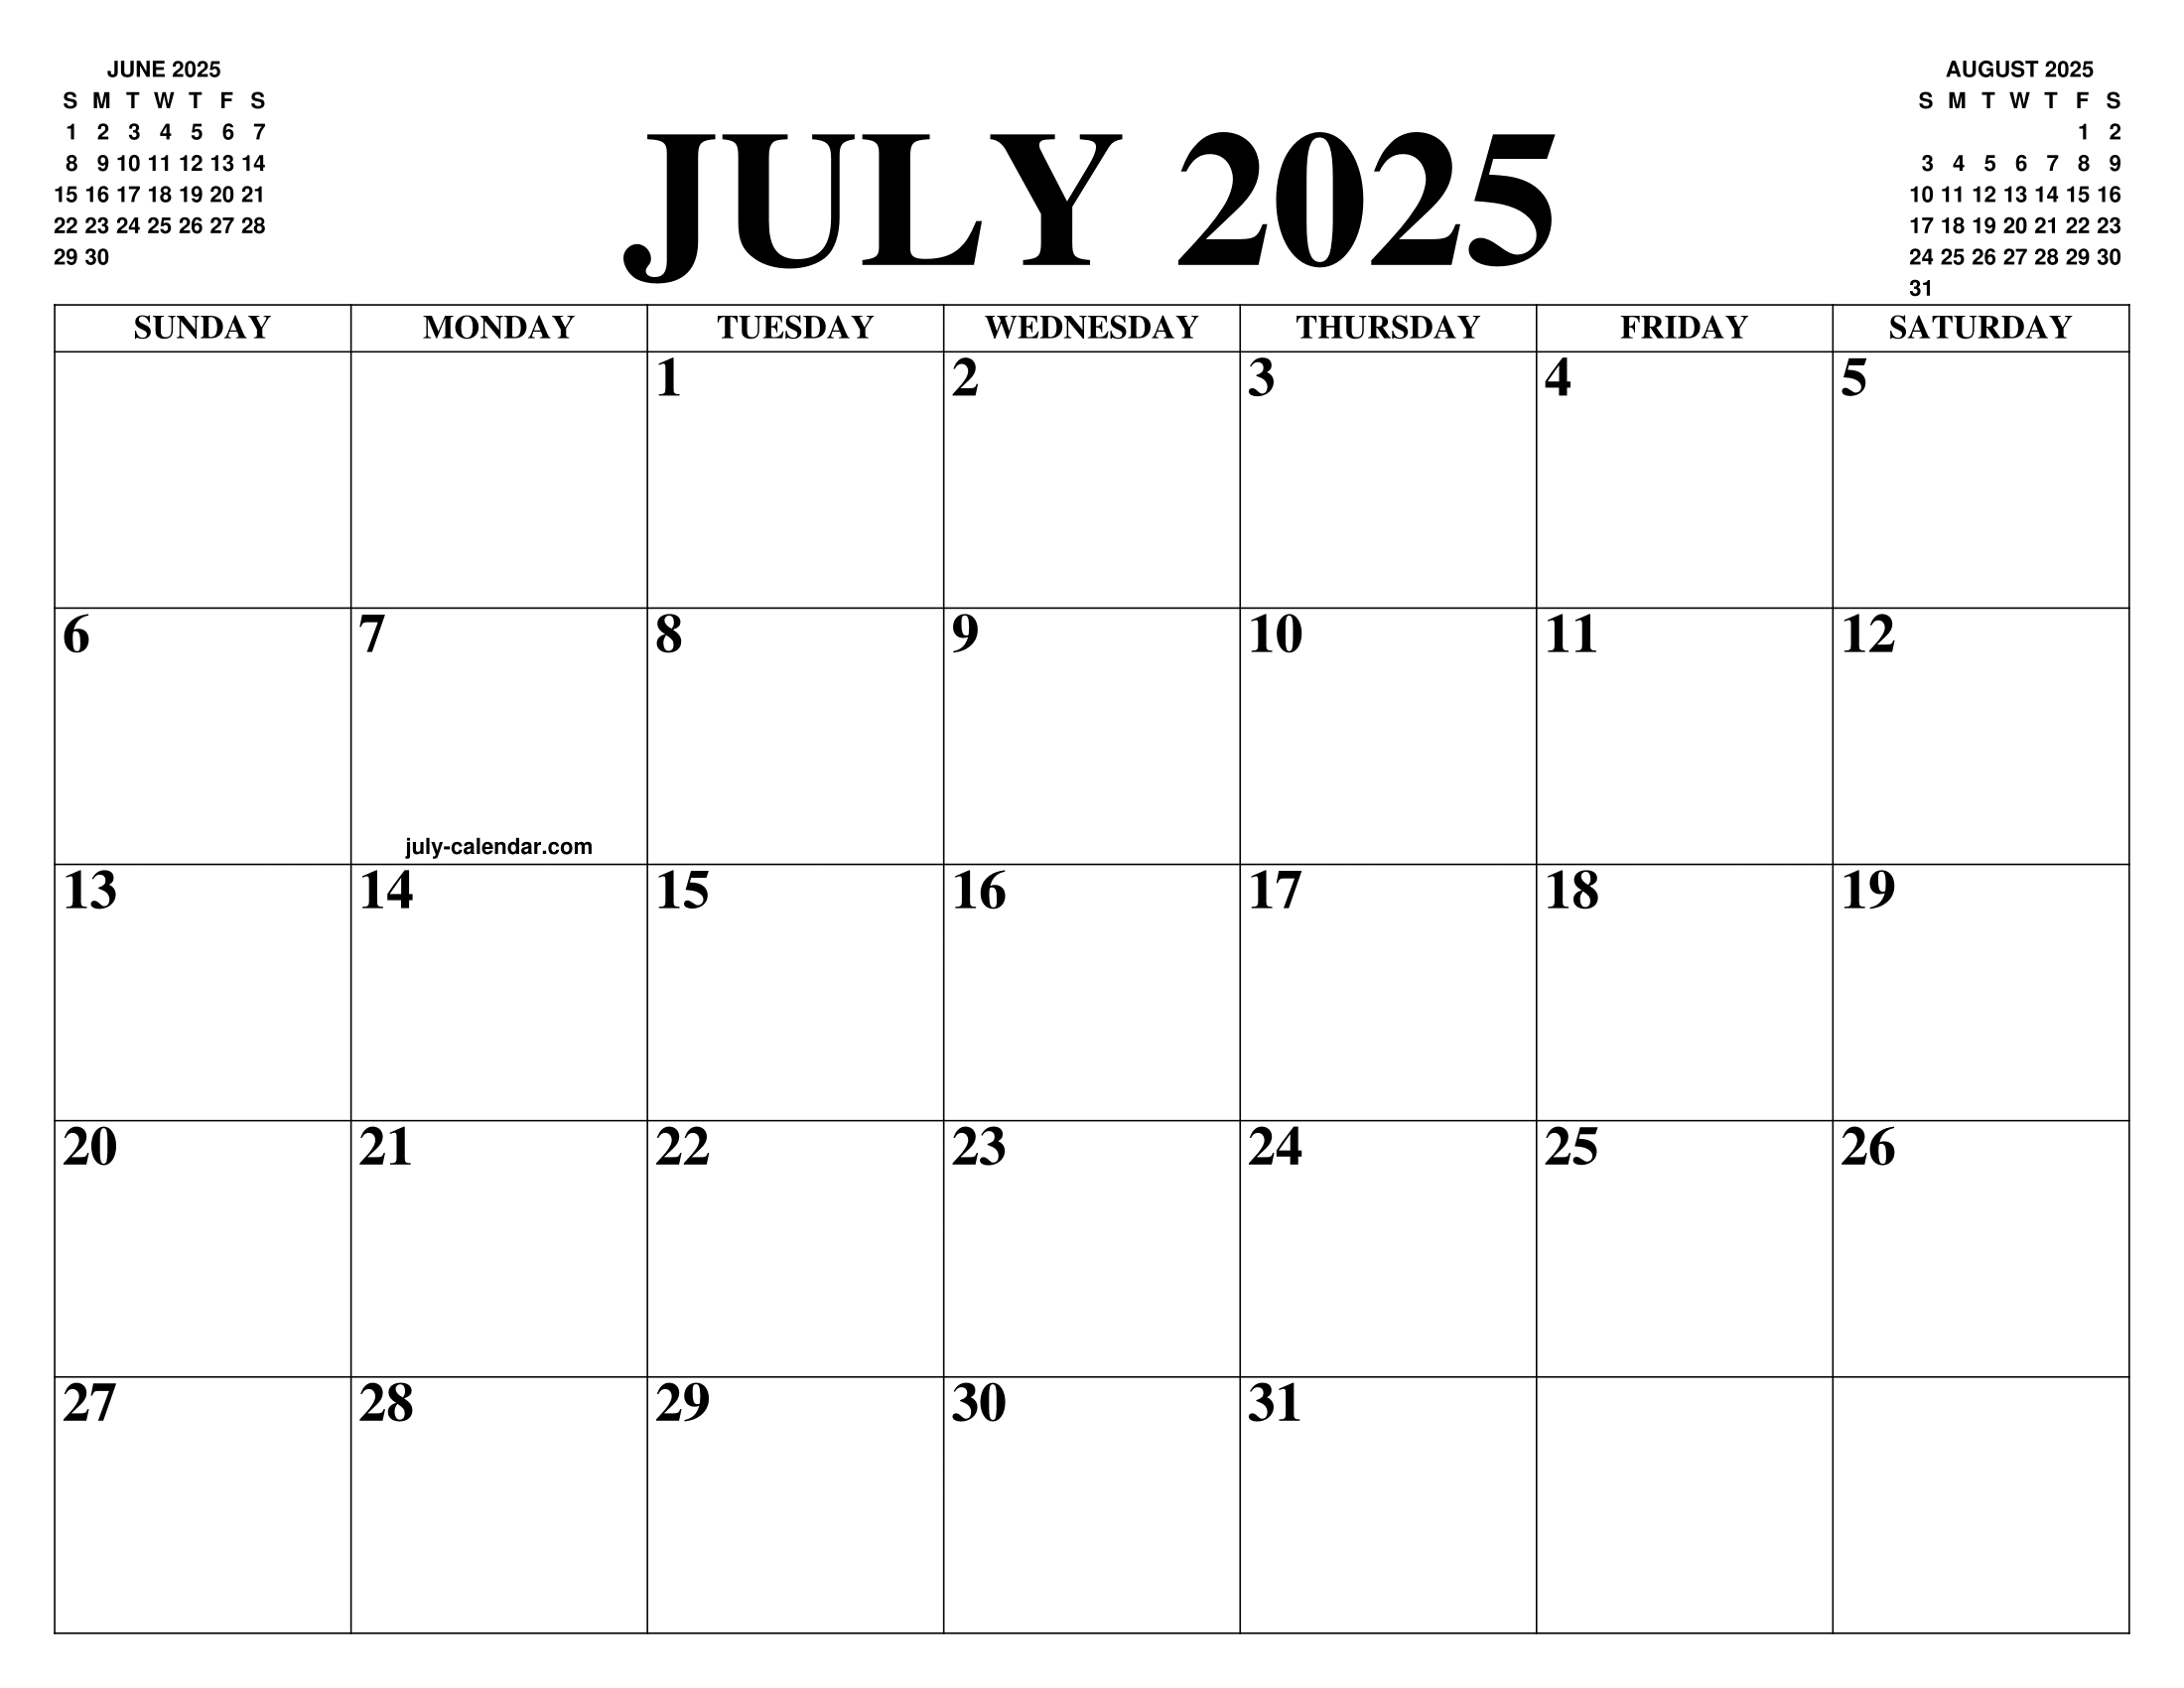 JULY 2025 CALENDAR OF THE MONTH: FREE PRINTABLE JULY CALENDAR OF THE